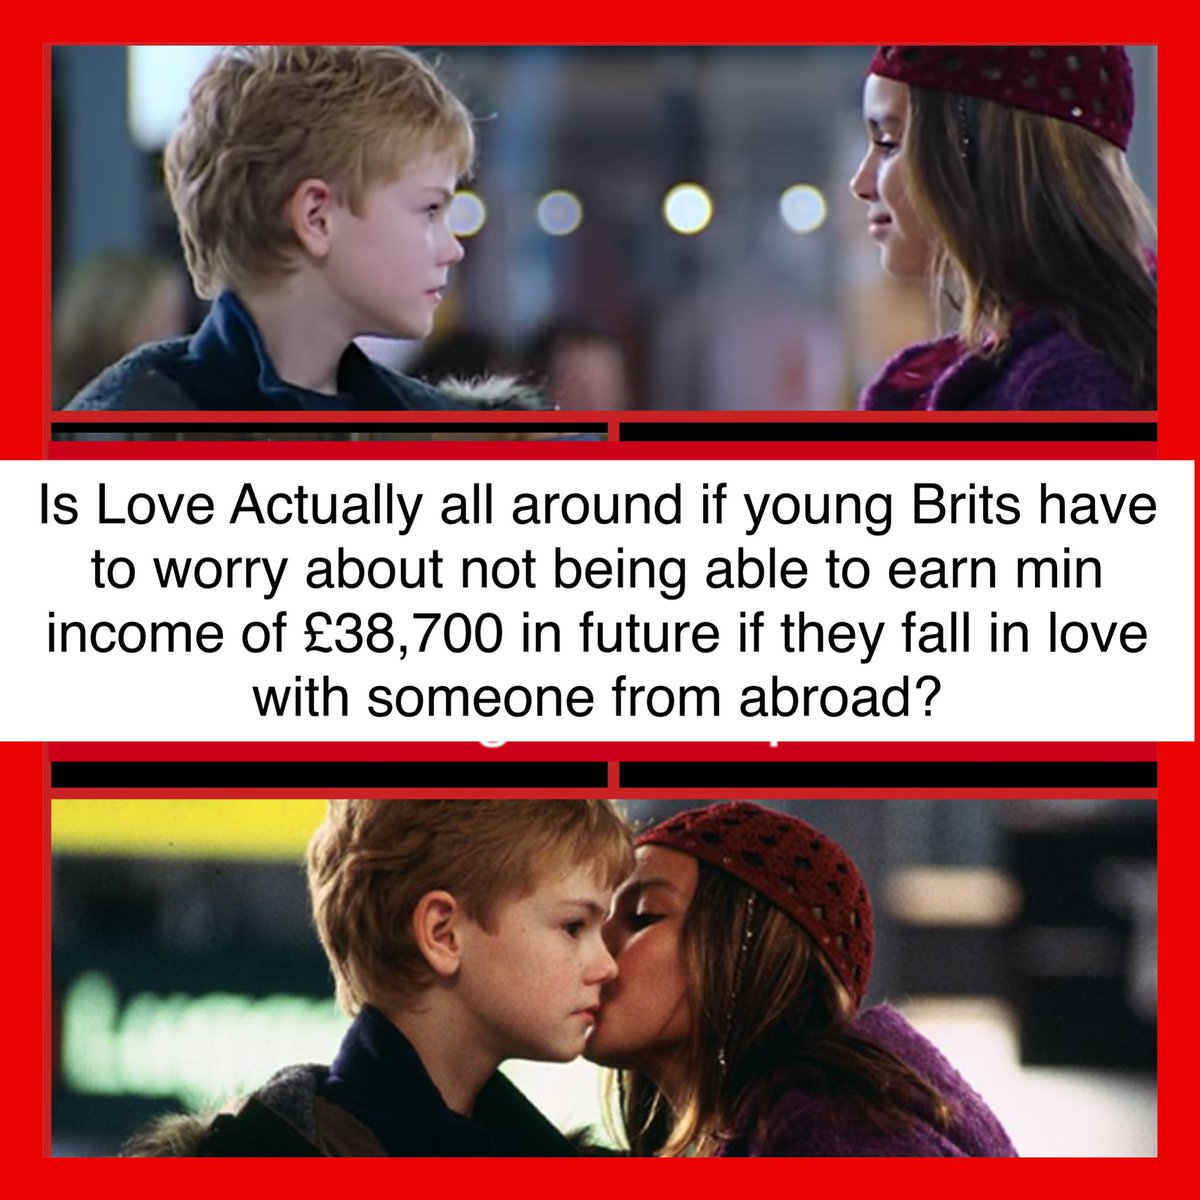 Can we hav a sequel where after 20 yrs, Sam & Joanna r separated cos Sam struggles to meet min income requirement of £38,700 to get Joanna a UK spouse visa? @Working_Title pls make this. LIKE & sign the petition #loveinlimbo #scraptheMIR #loveactually petition.parliament.uk/petitions/6526…